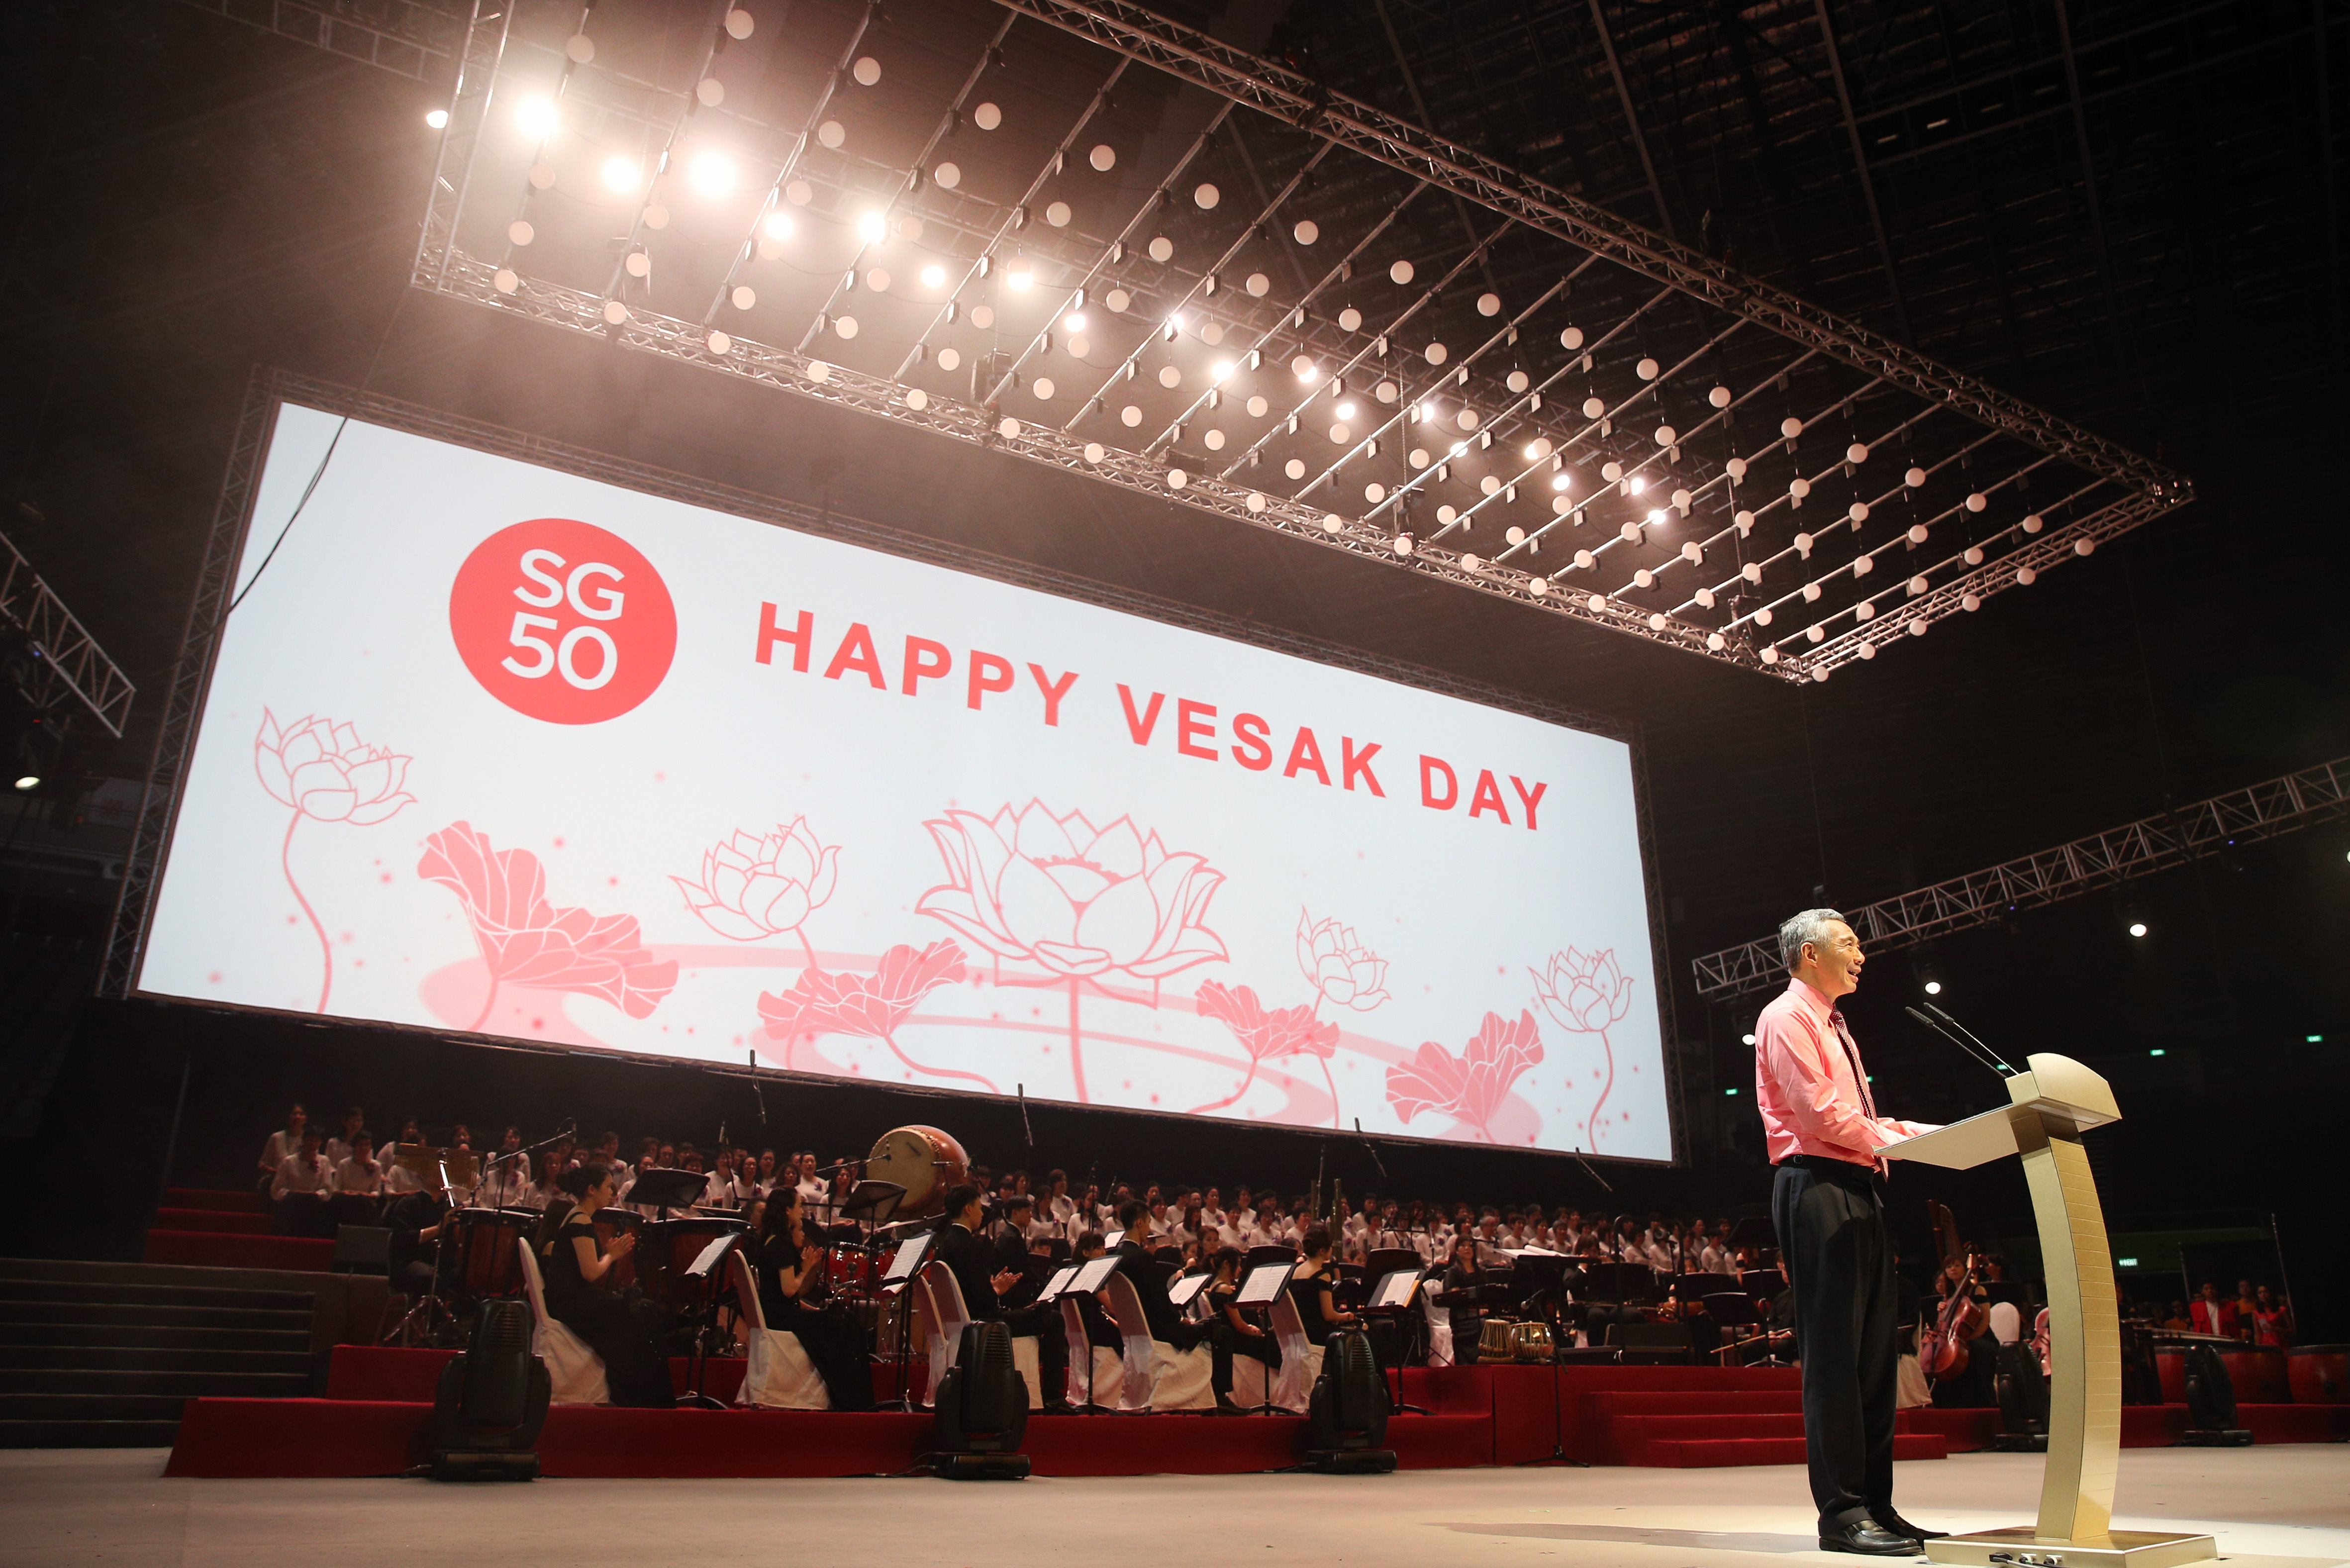  Prime Minister Lee Hsien Loong at the Singapore Buddhist Federation Vesak and SG50 Concert on 15 May 2015 (MCI Photo by Terence Tan)